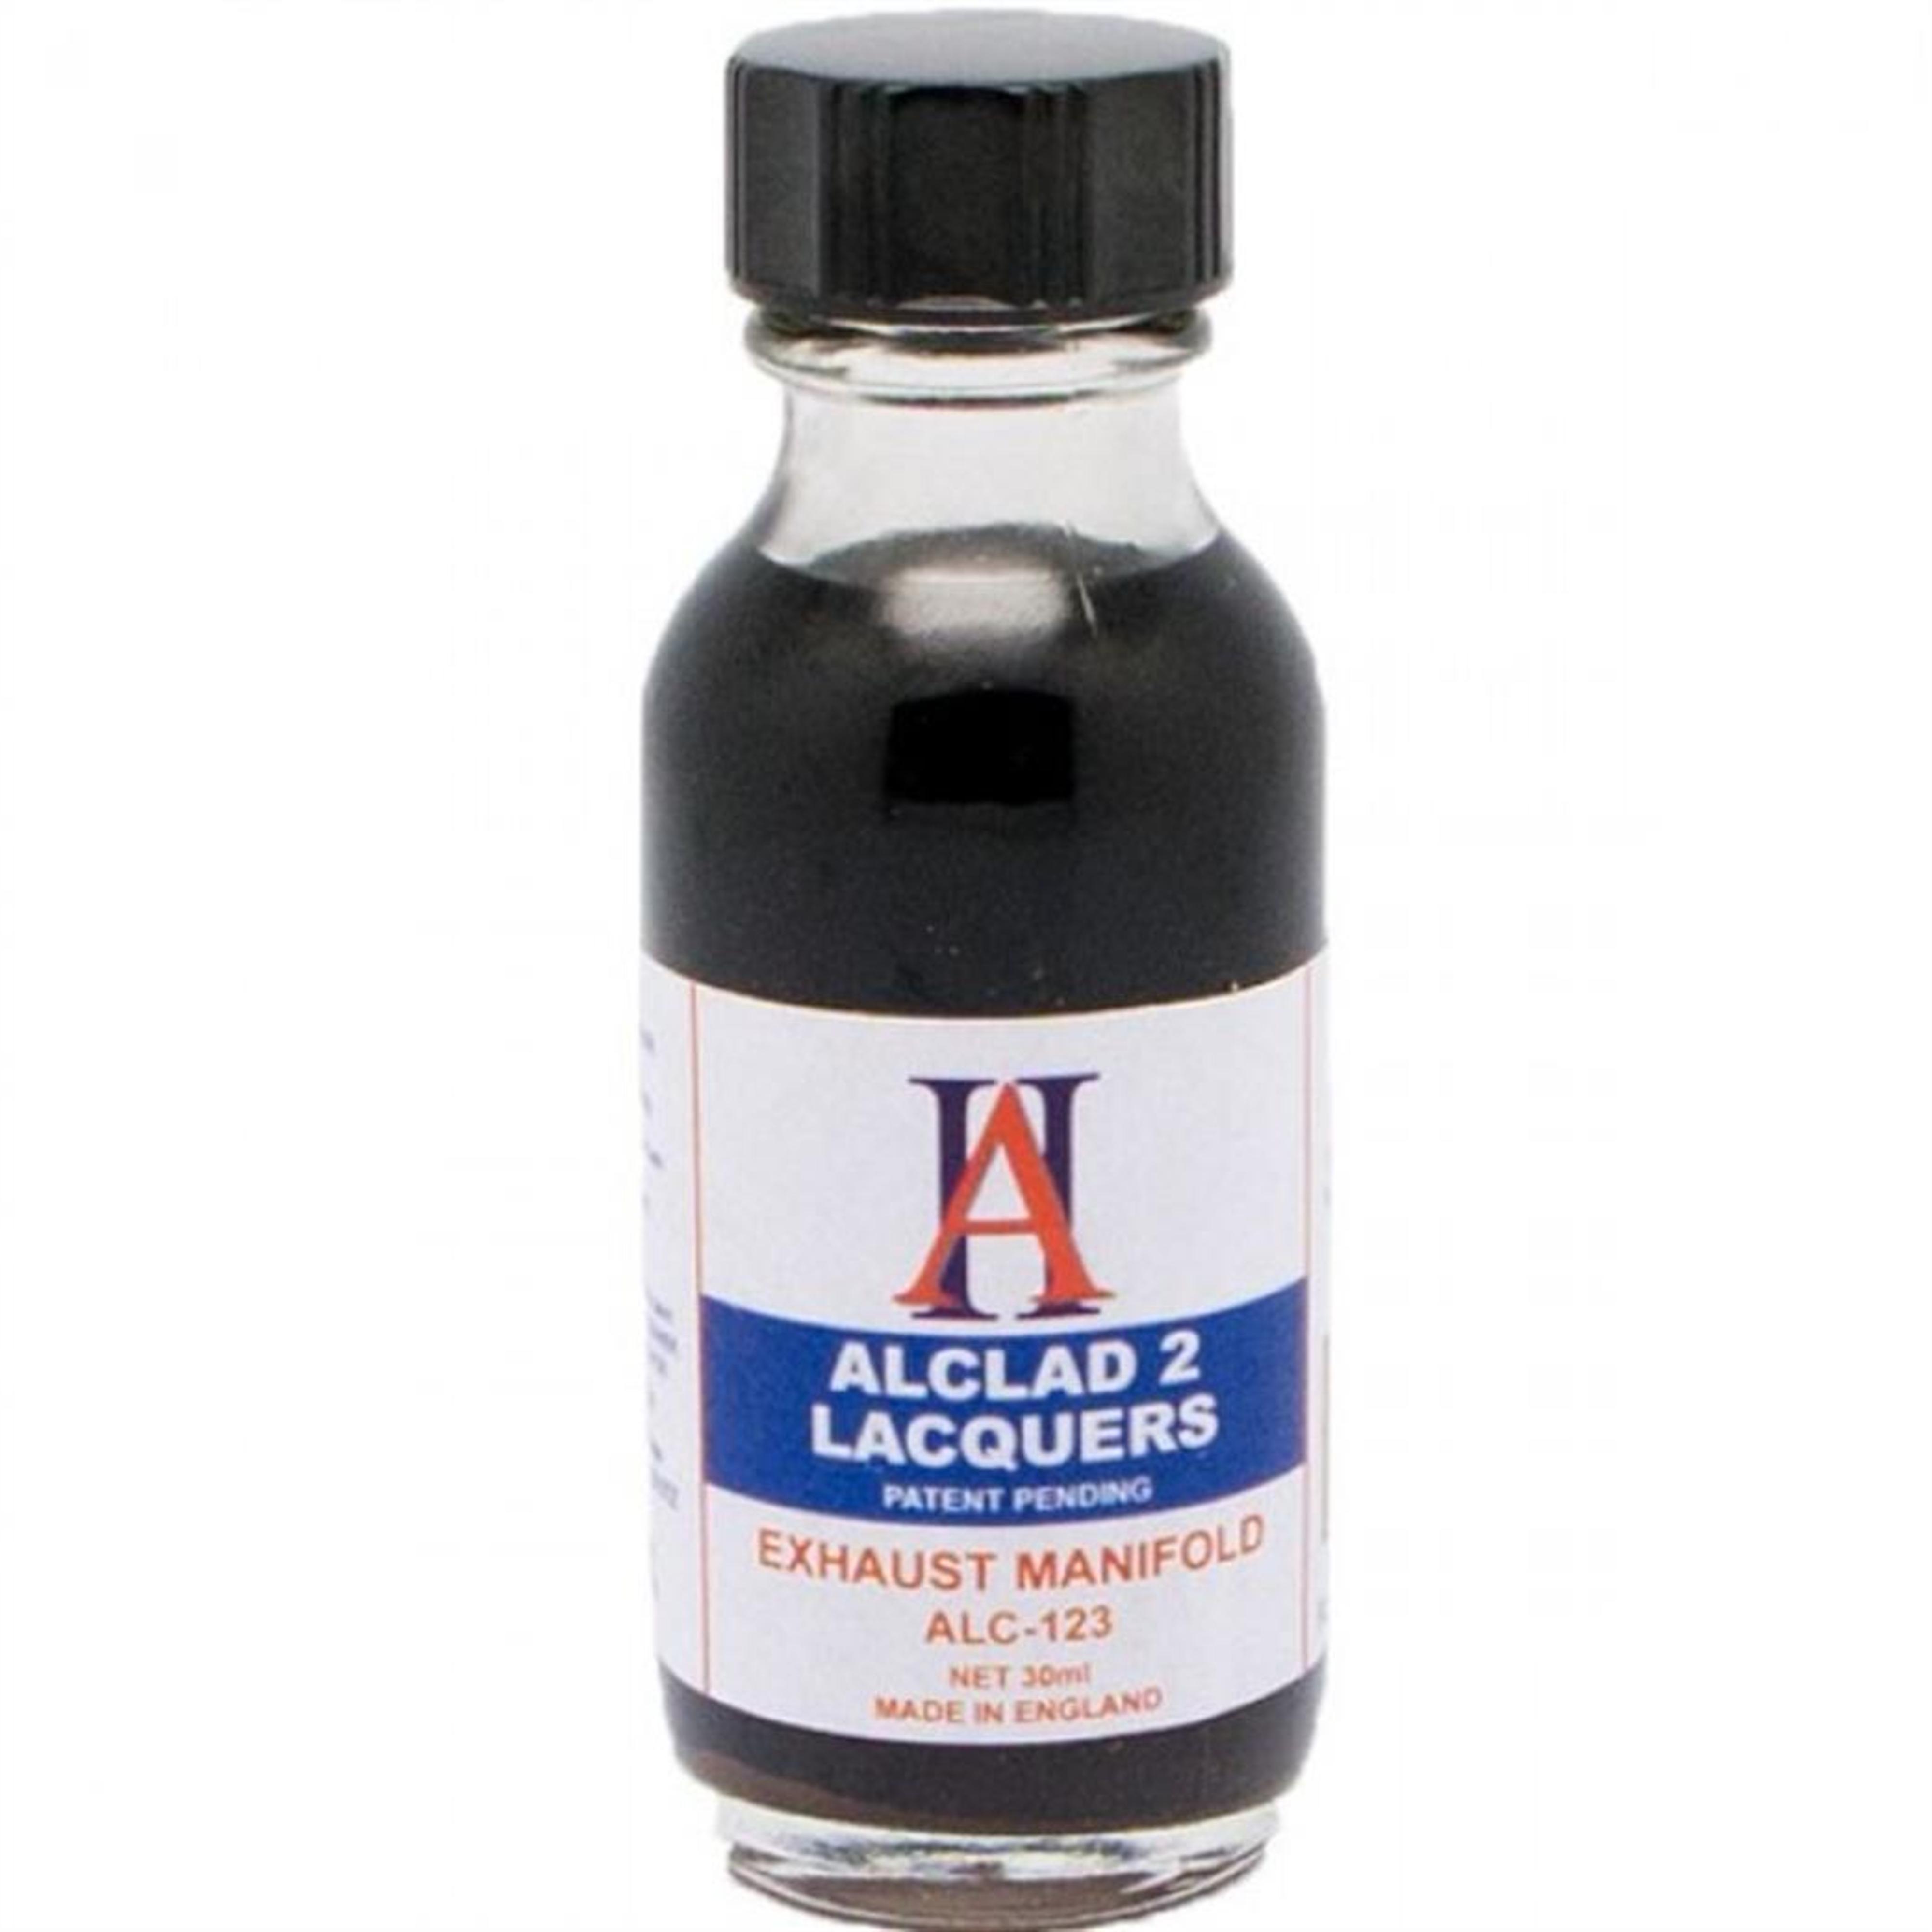 Alclad II Lacquers Exhaust Manifold 1oz